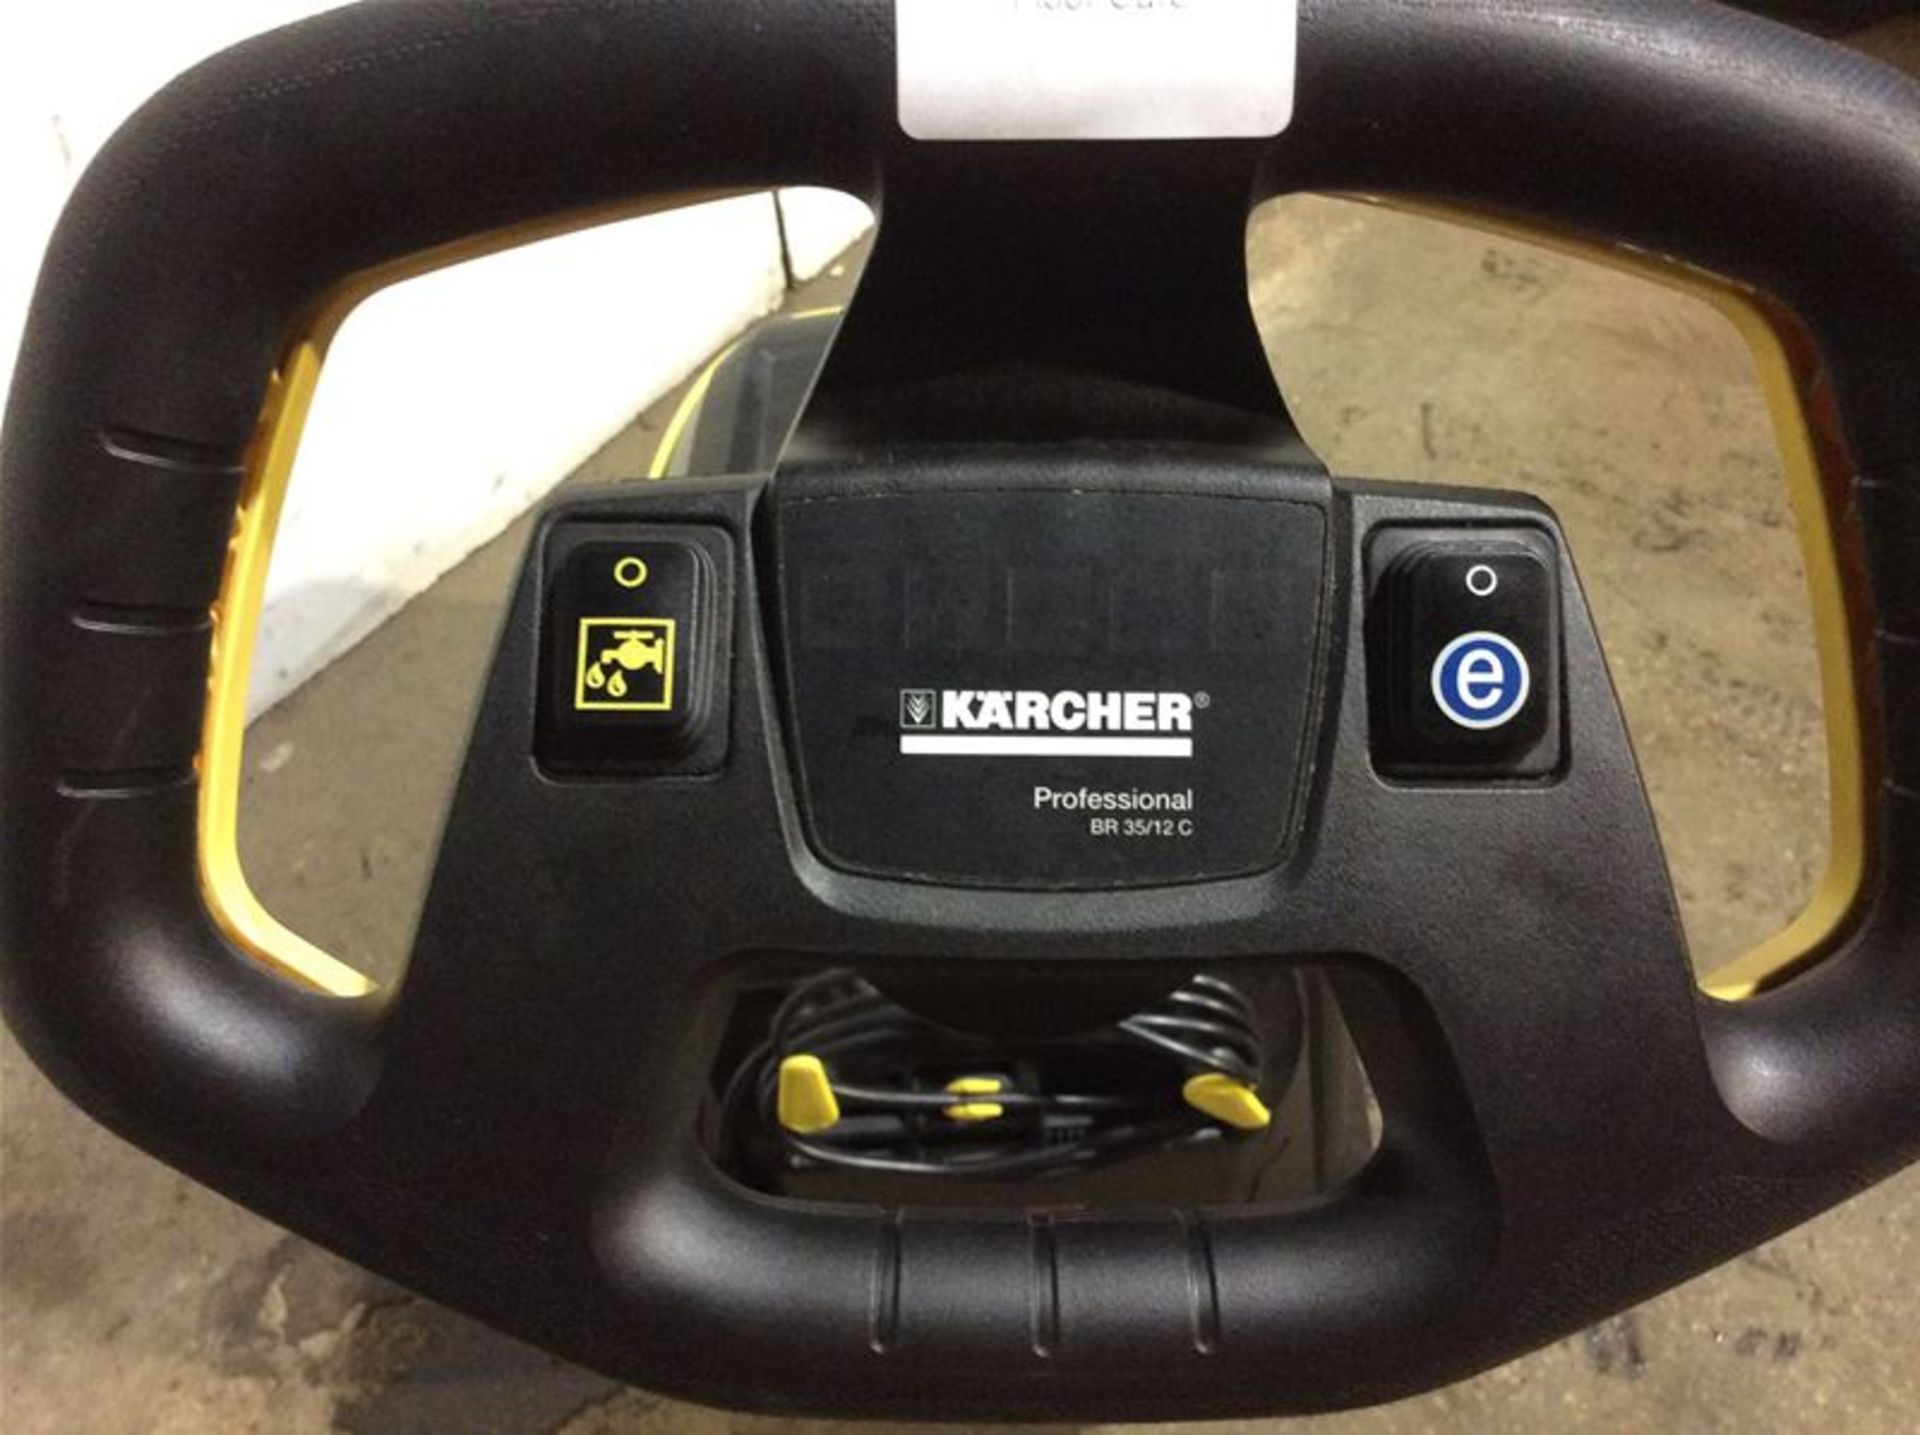 KARCHER BR 35/12 C WALK-BEHIND COMPACT FLOOR SCRUBBER - BATTERY OPERATED - Image 4 of 5